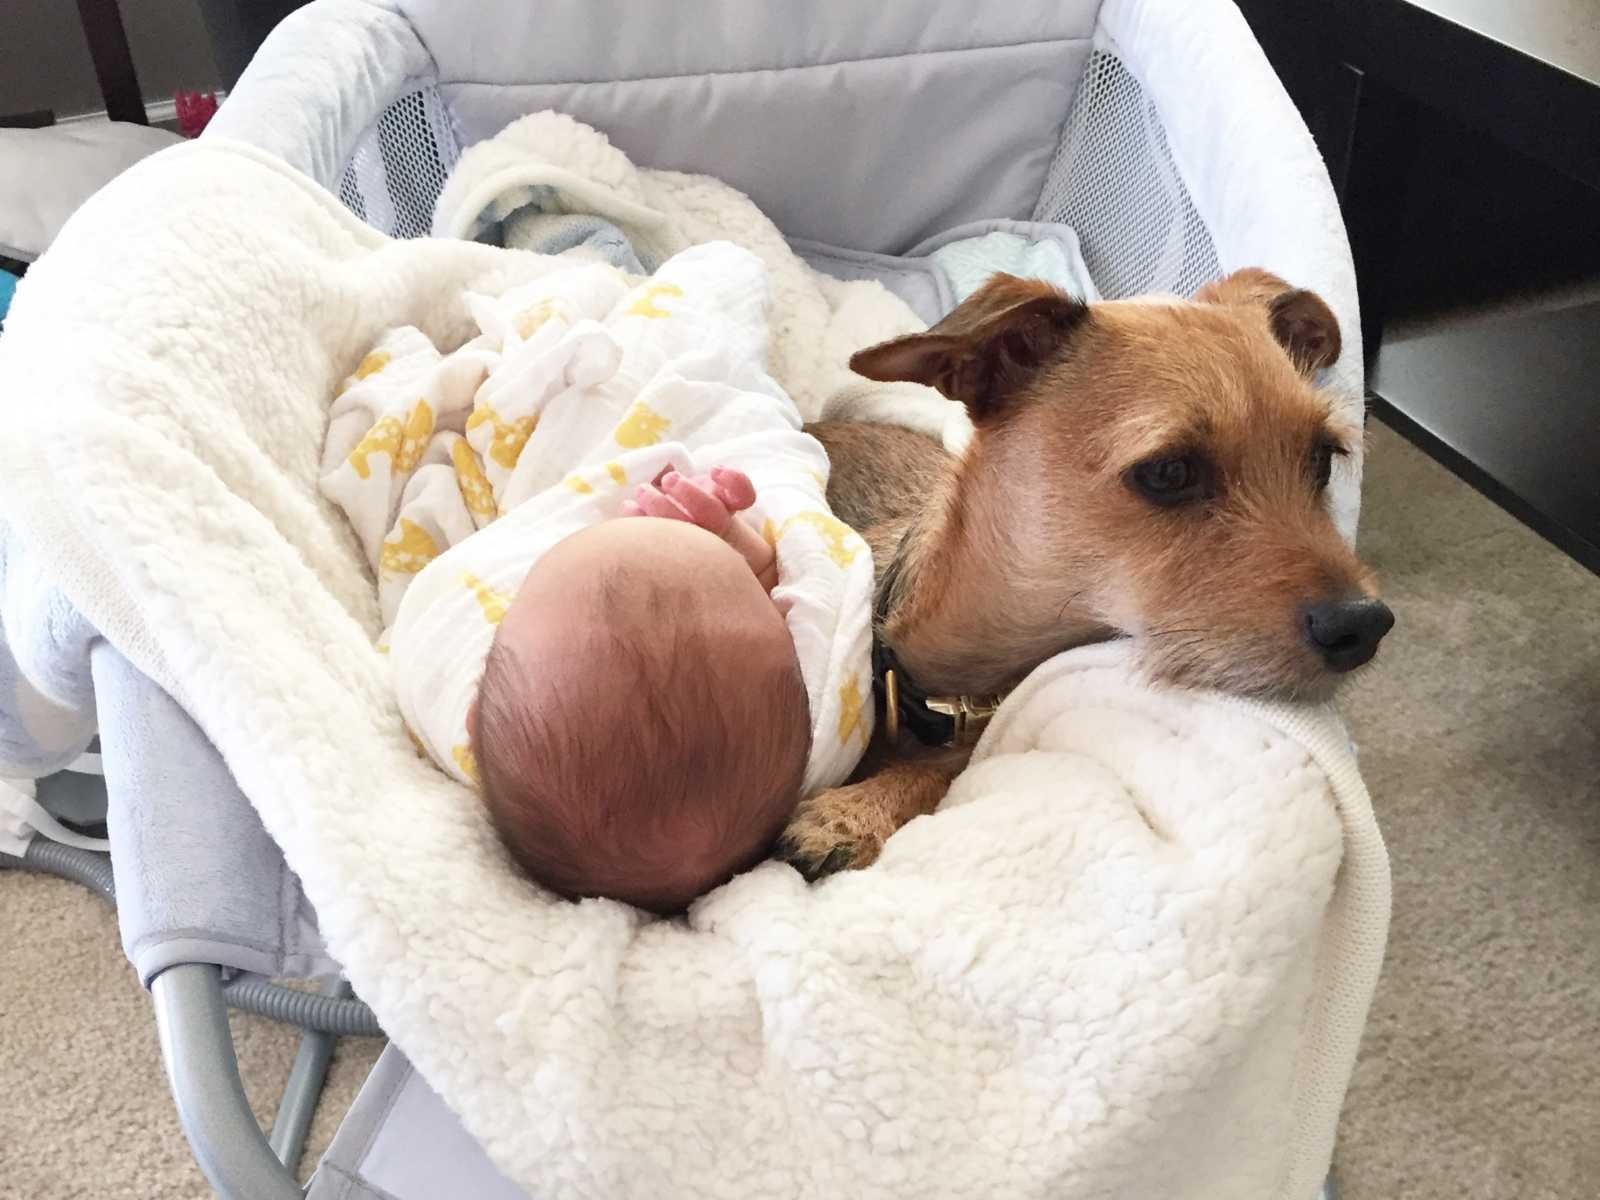 baby sleeping in portable crib with dog laying next to it